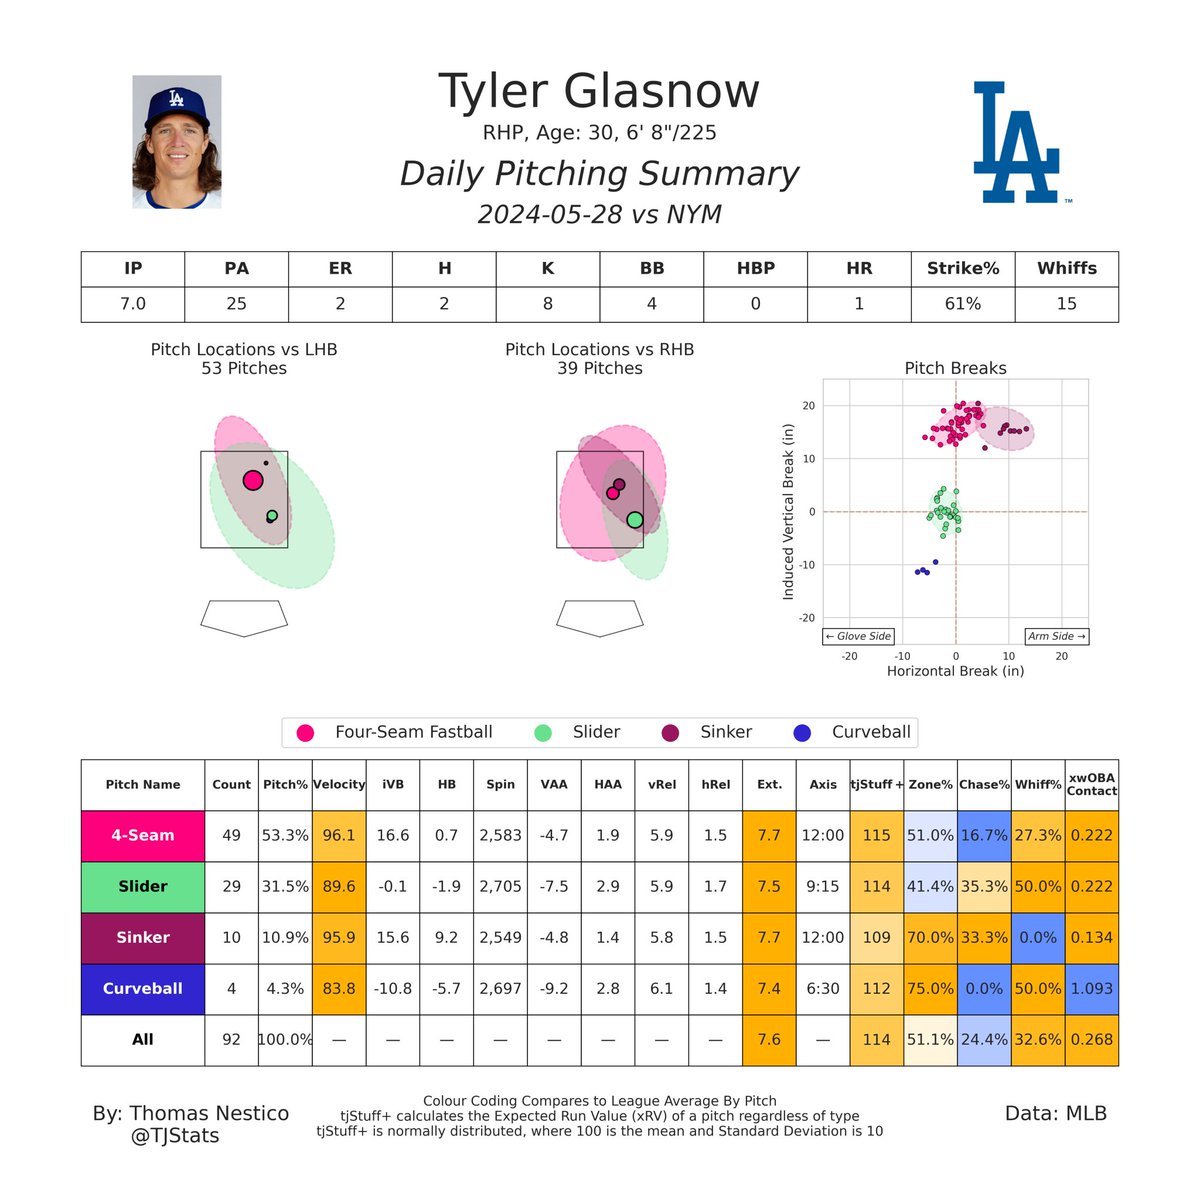 Tyler Glasnow had a strong start today, tossing 7.0 IP with 2 ER, 2 H, 8 K, 4 BB

Glasnow showed off his fantastic stuff generating 15 whiffs on 32.6 Whiff%. The damage came off a hanging curveball which Lindor took for a HR. Other than that, and the 4 BB, he was great